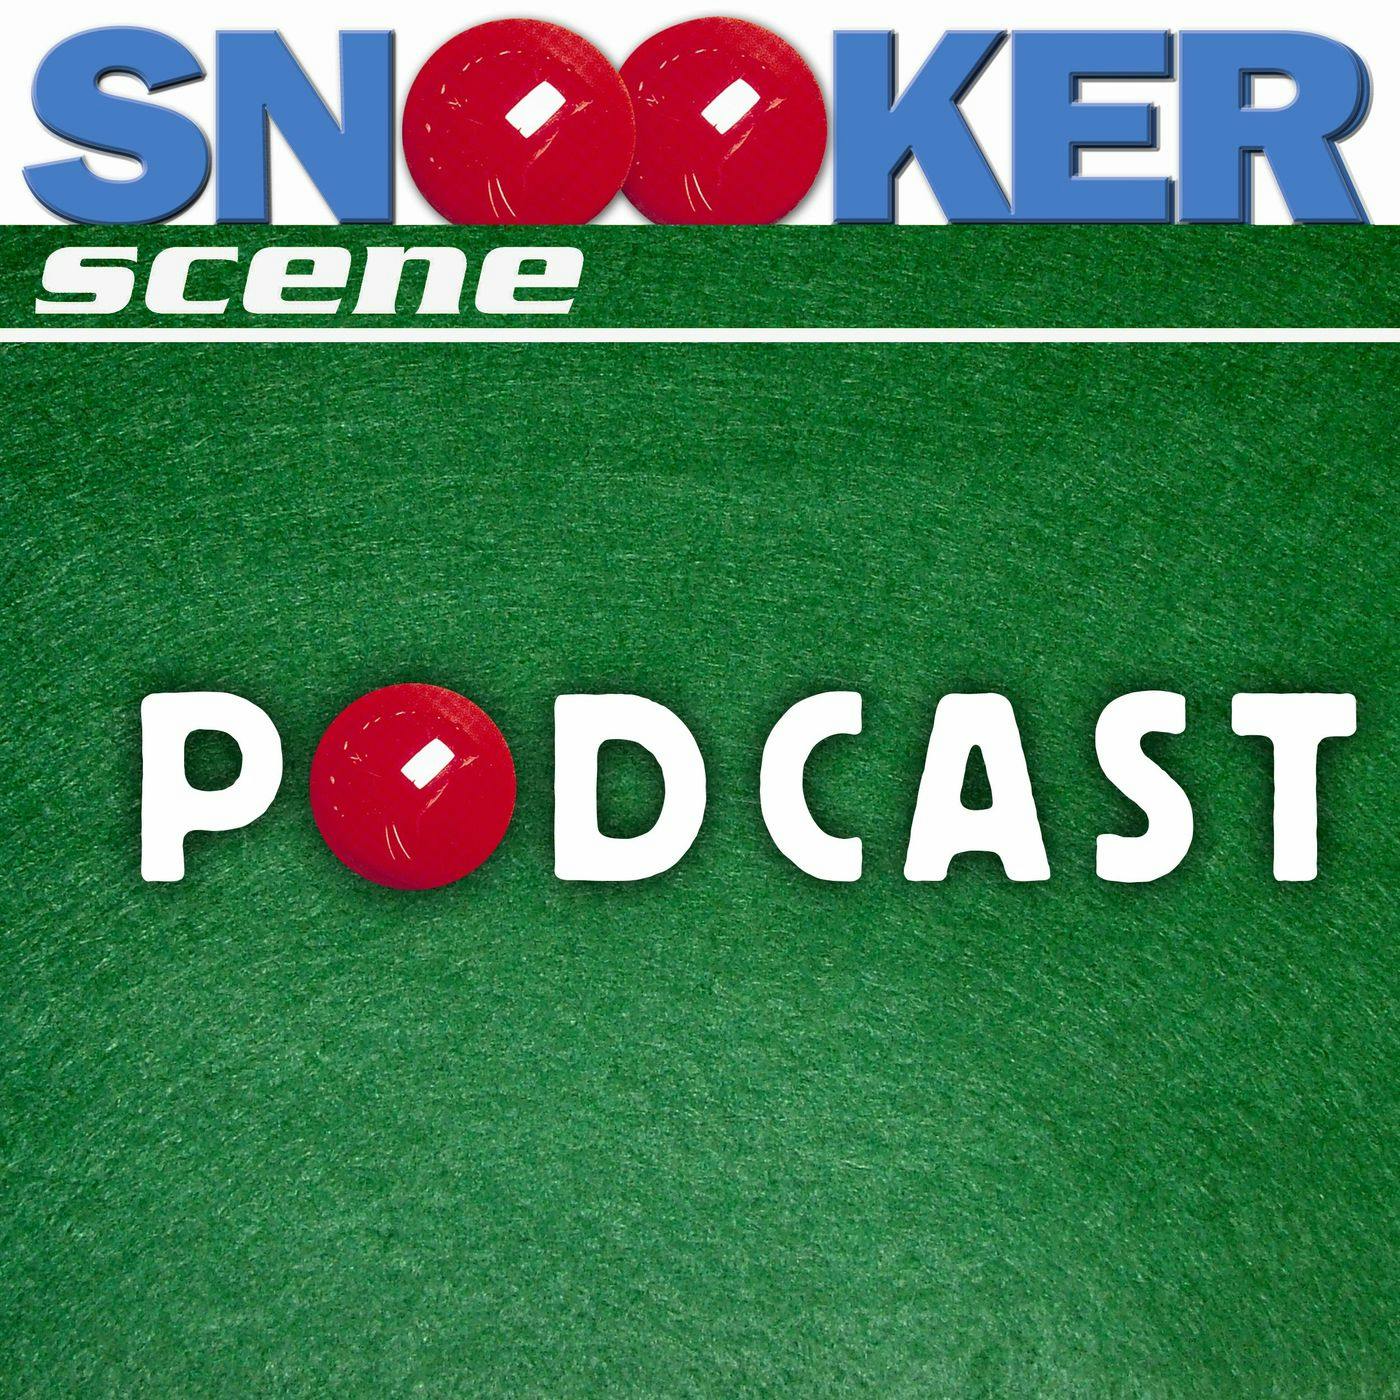 Snooker Scene Podcast episode 189 - Come on, baby! Yeah!